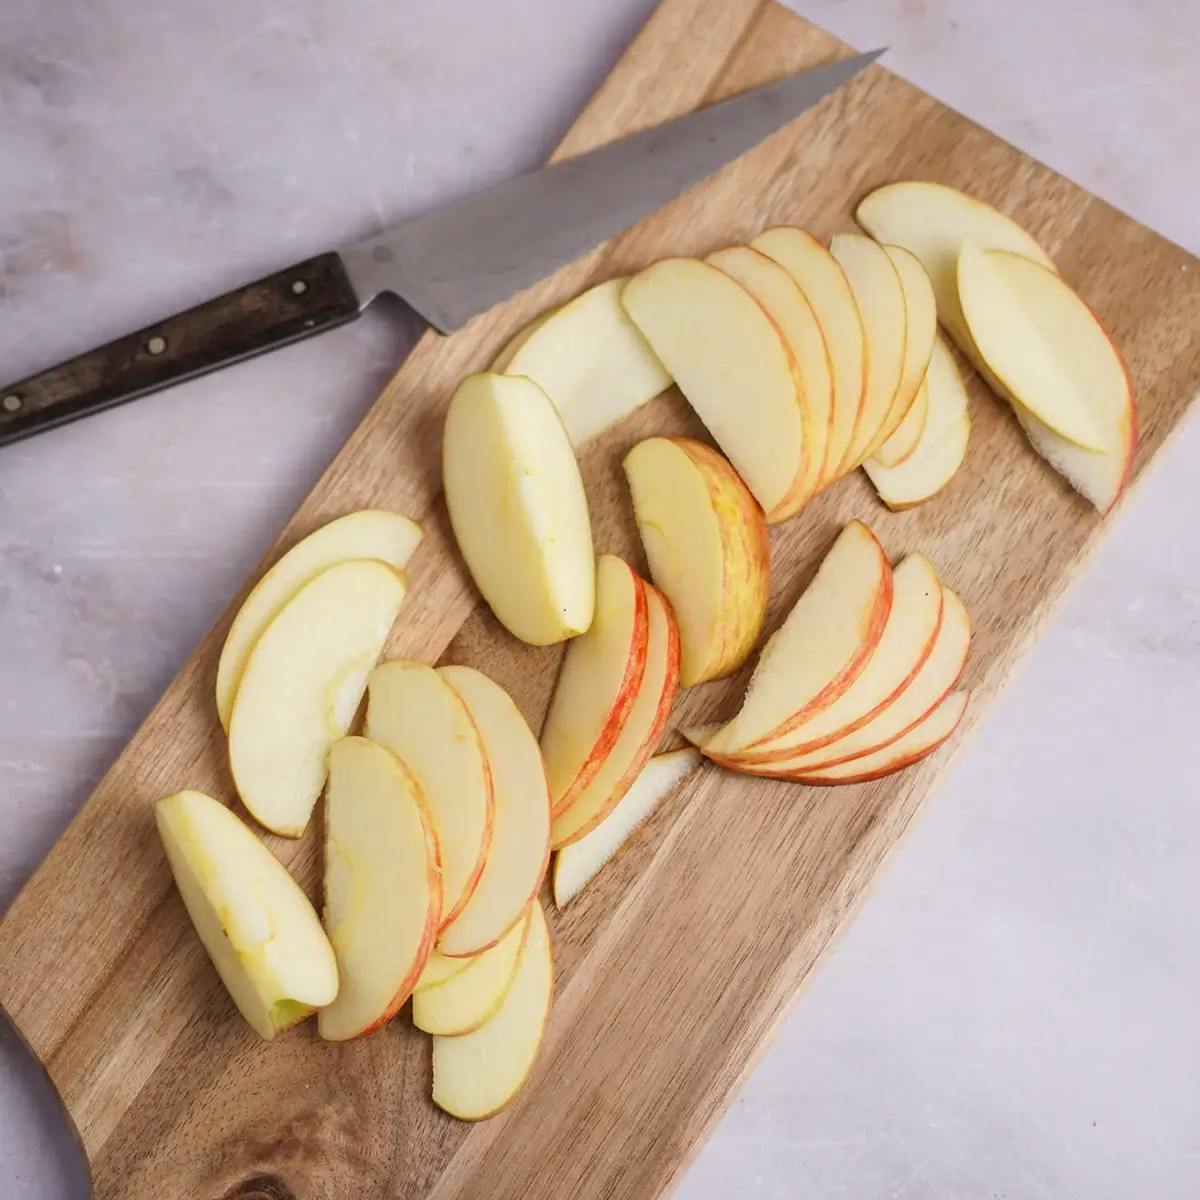 Slicing apples into slices ready to go into a Christmas salad with fruit.